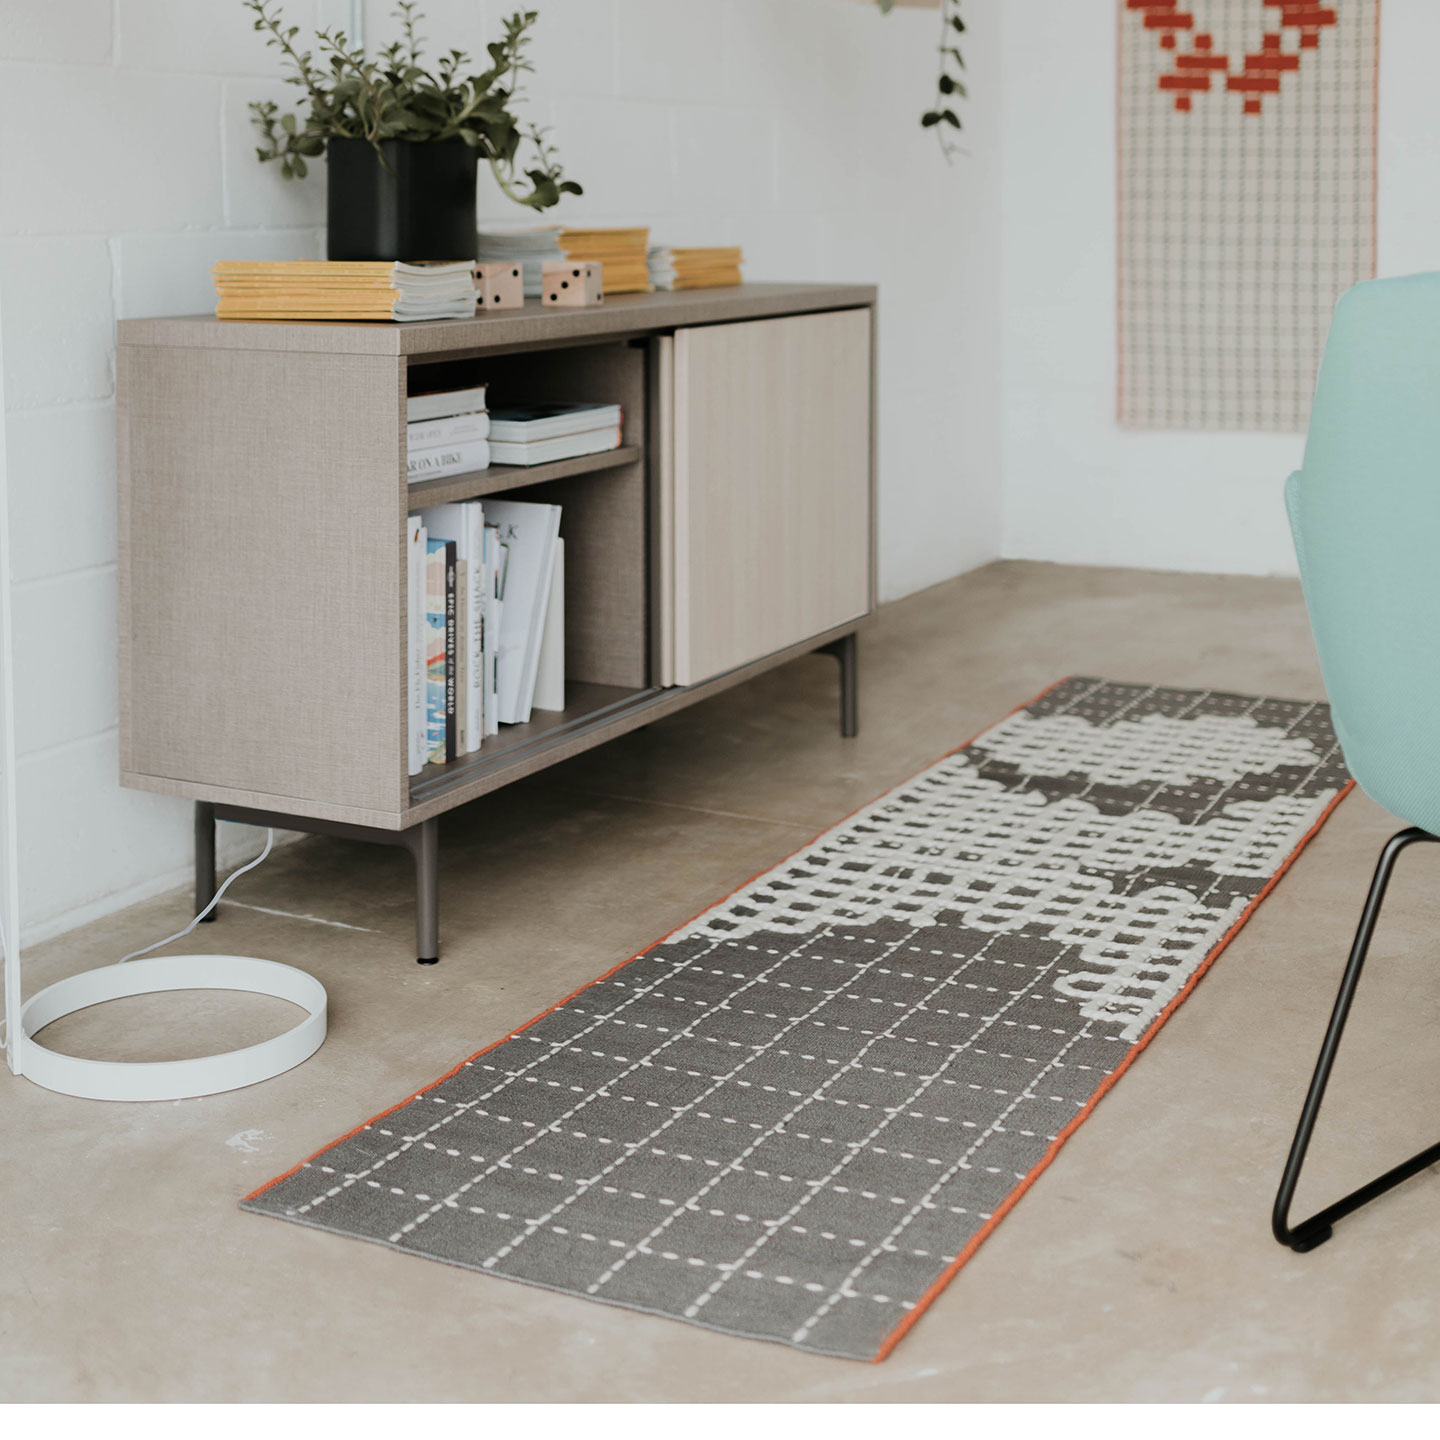 Haworth Bandas Space Rug in grey by office storage area and blue chair